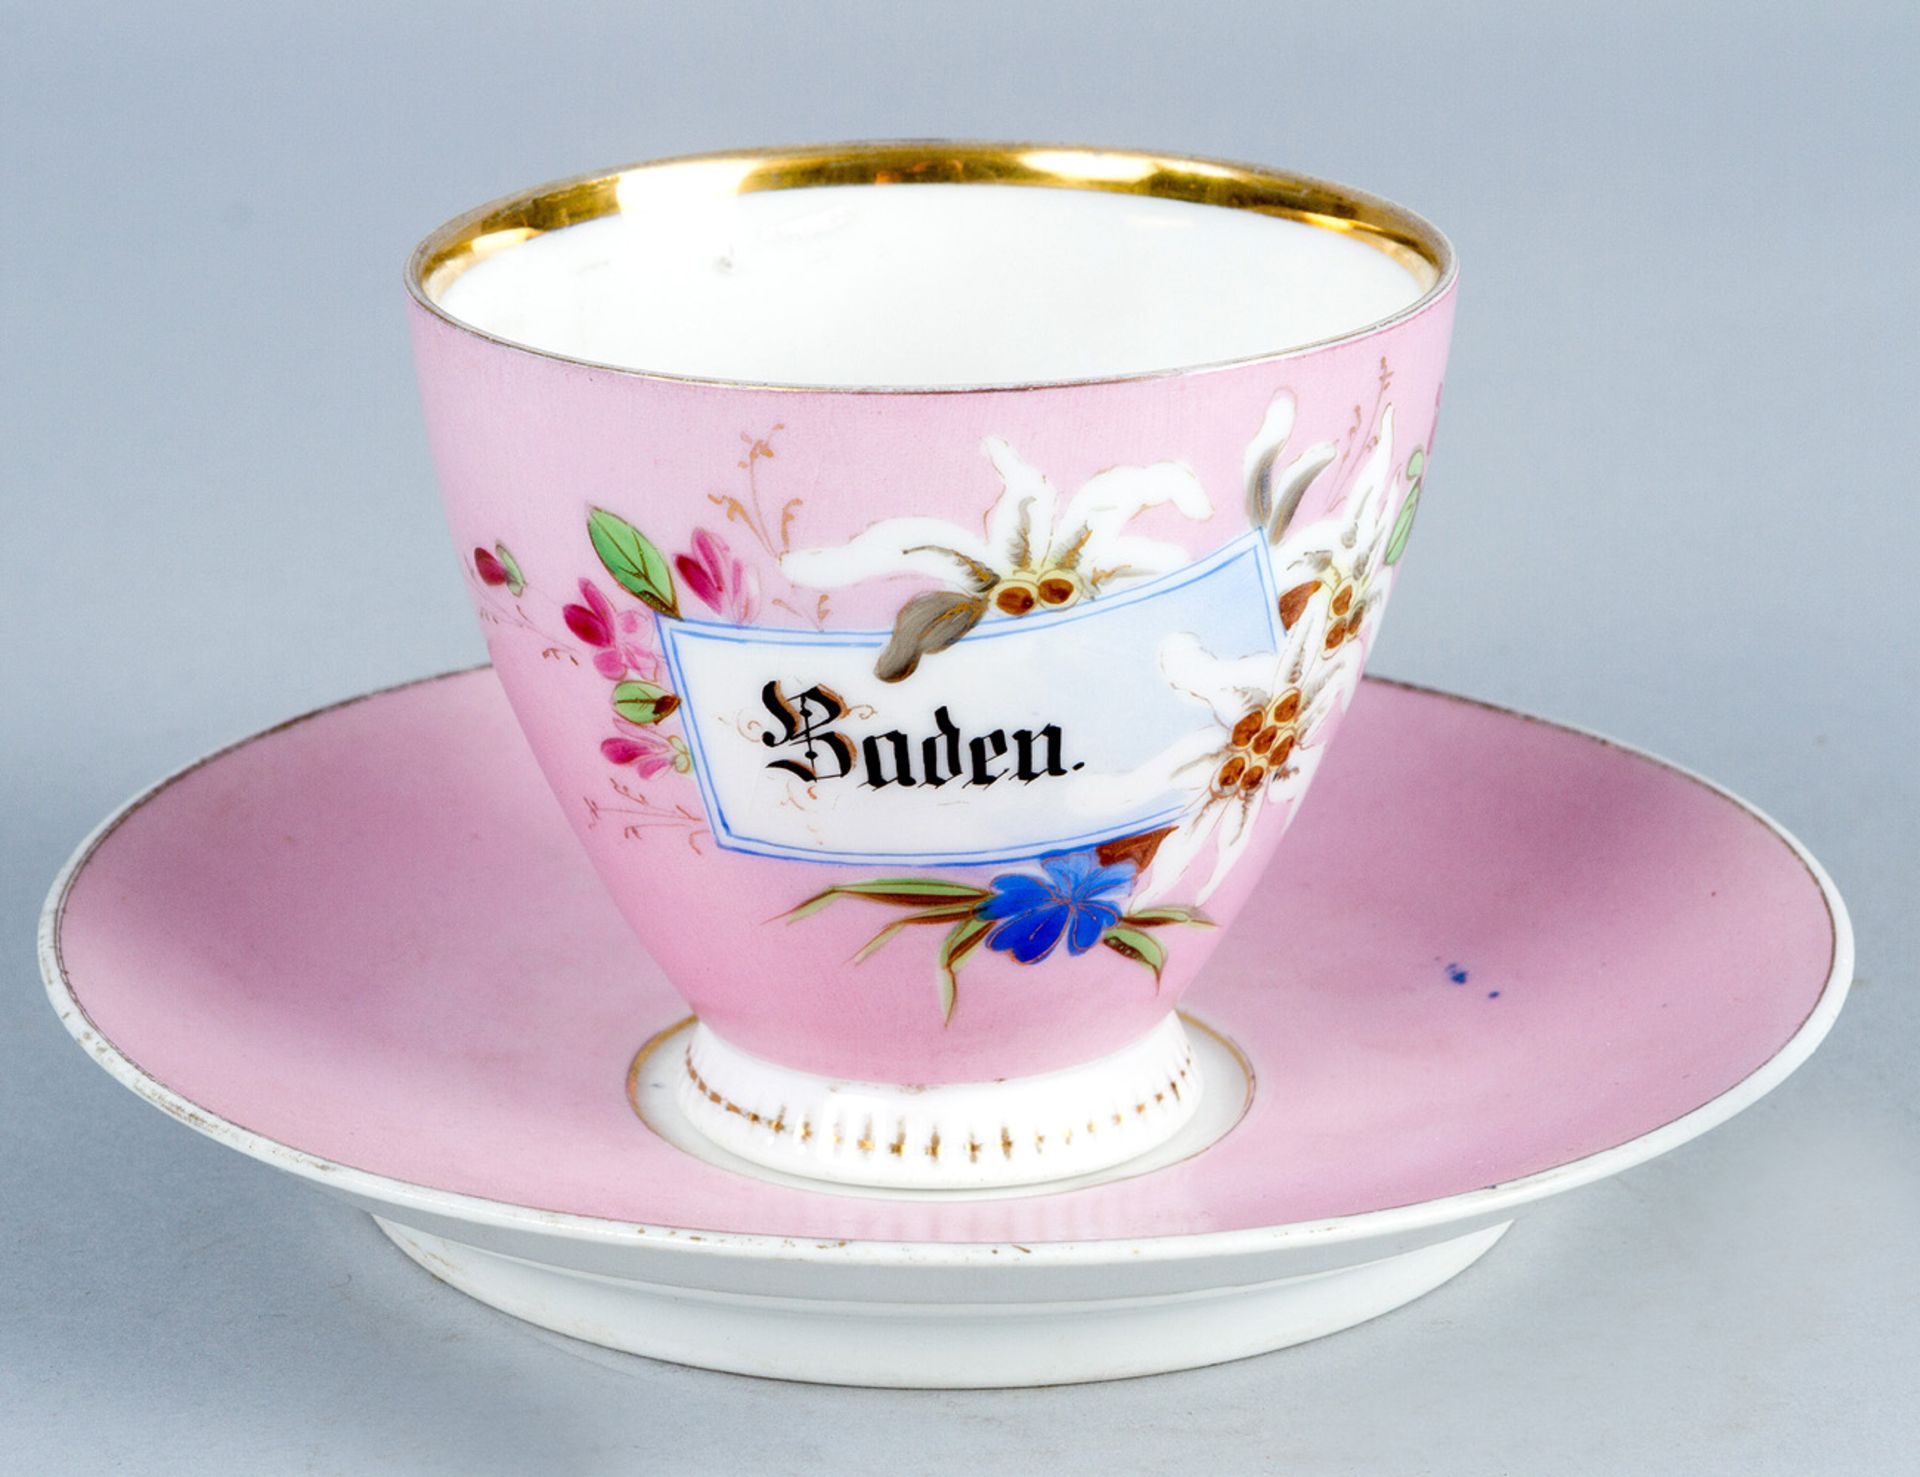 Baden by Vienna porcelain cup